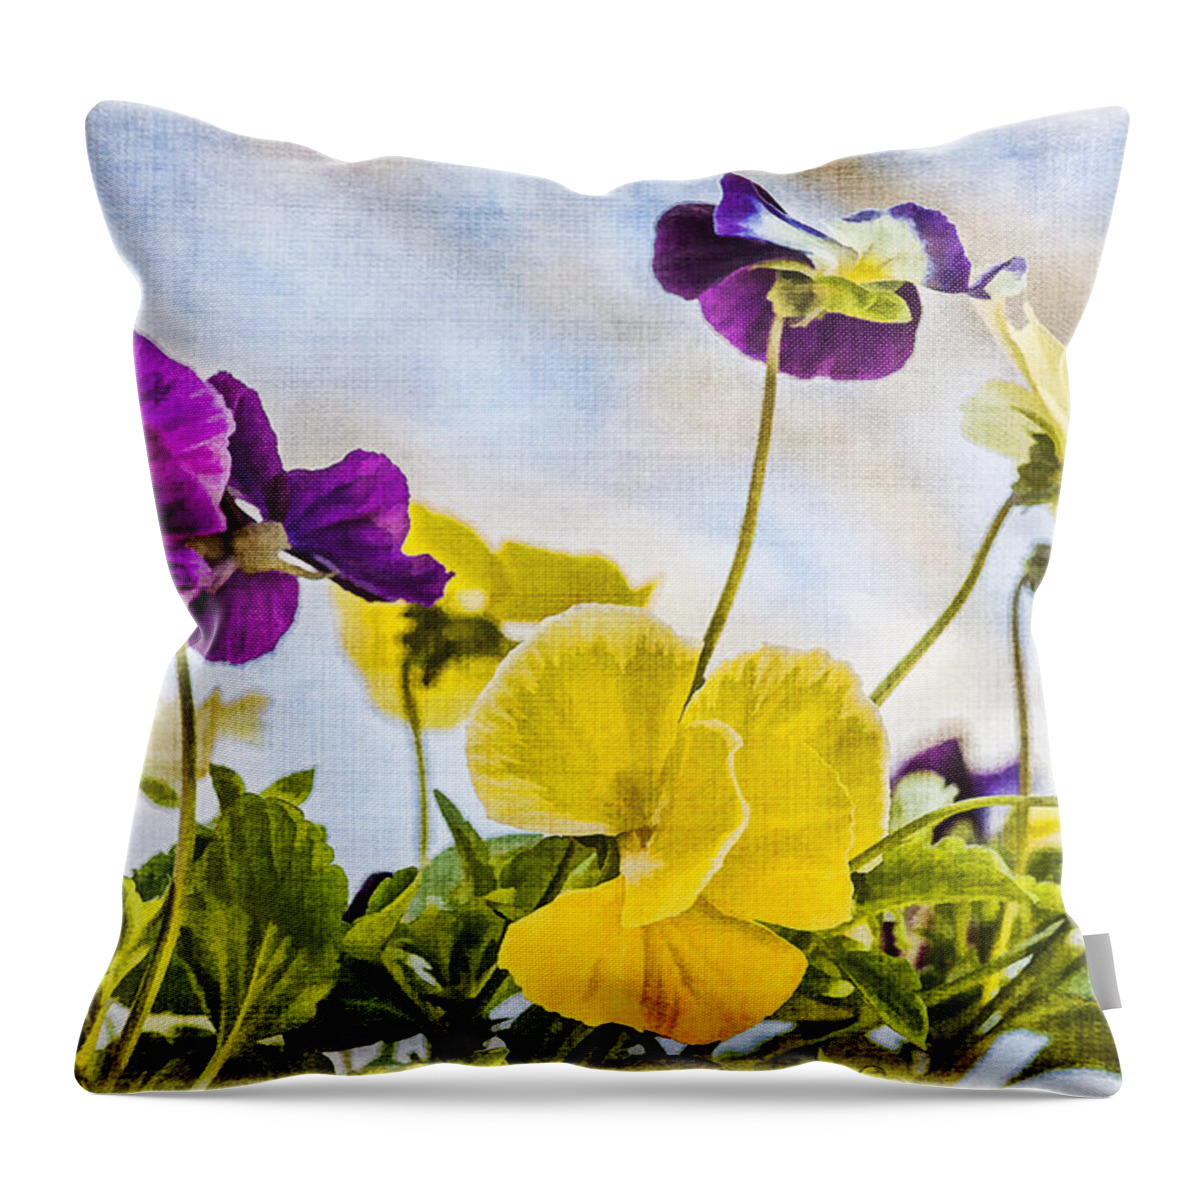 Pansies Throw Pillow featuring the photograph Painted Pansies by Cathy Kovarik